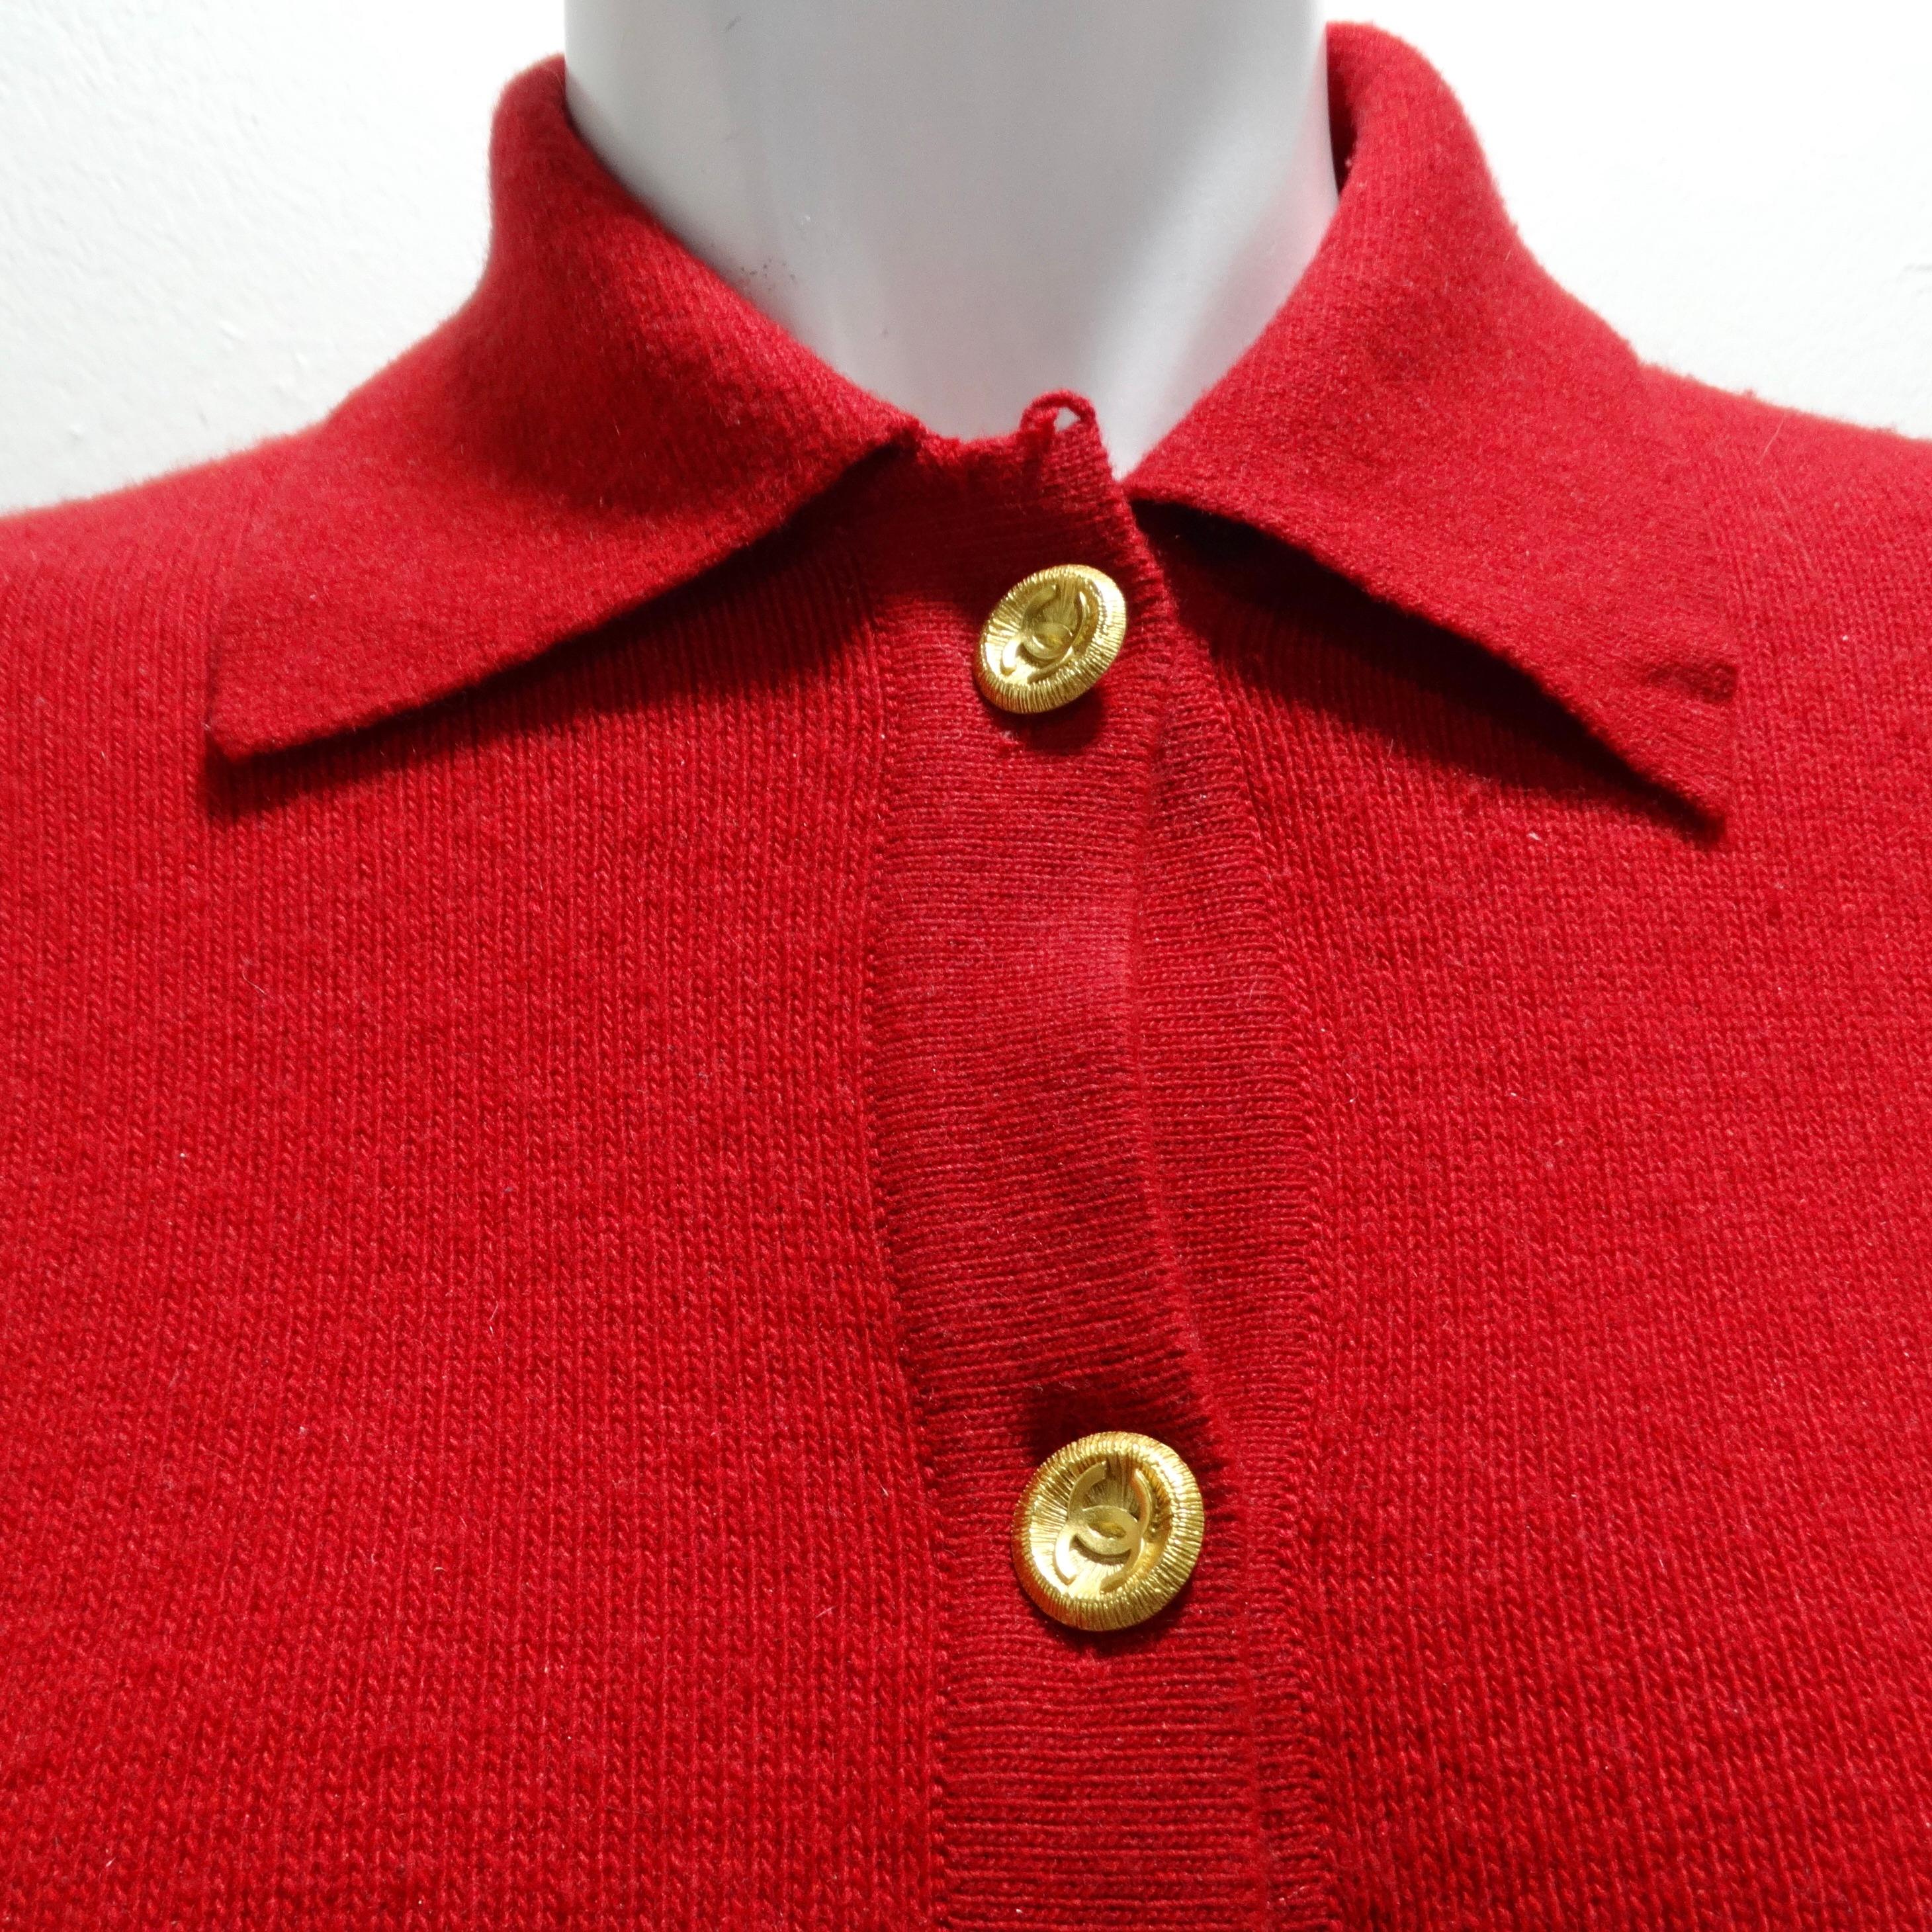 Indulge in luxury with the Chanel 90s Red Cashmere Cardigan. This thick cashmere button-up cardigan boasts a collar, two central pockets, and a plethora of shiny yellow gold-tone buttons, each adorned with the iconic CC logo. A vibrant statement